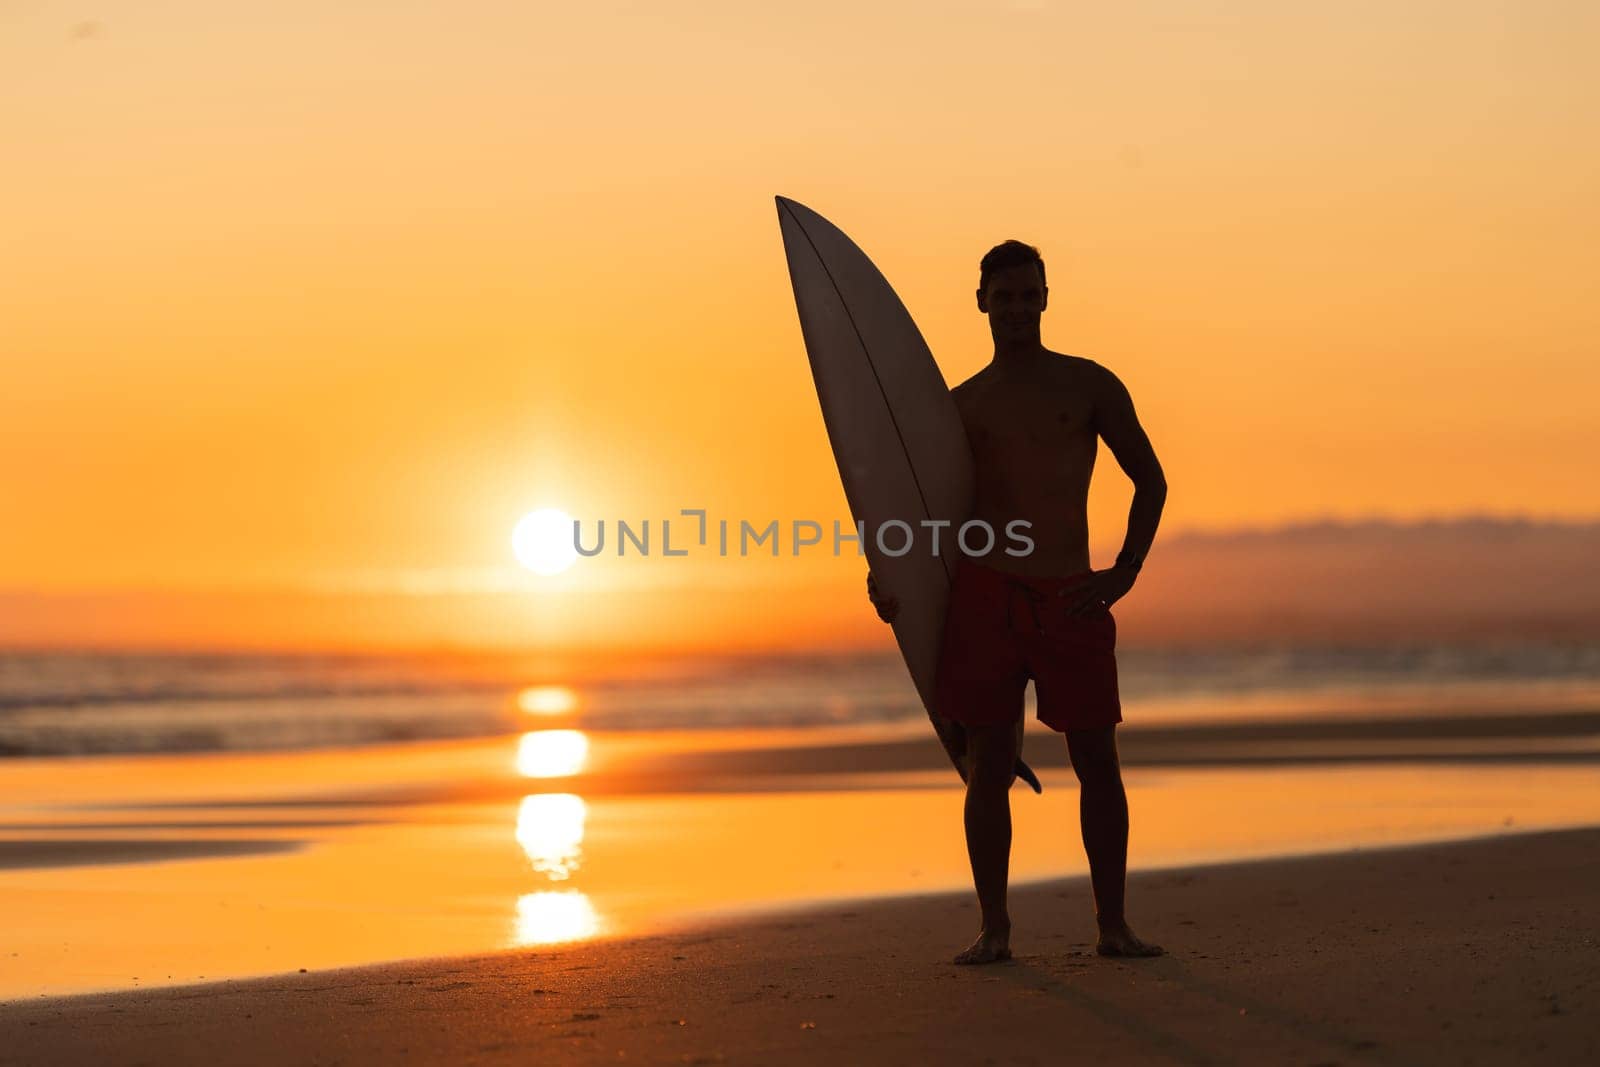 Black silhouette of an attractive man standing on the shore holding a surfboard at orange sunset by Studia72